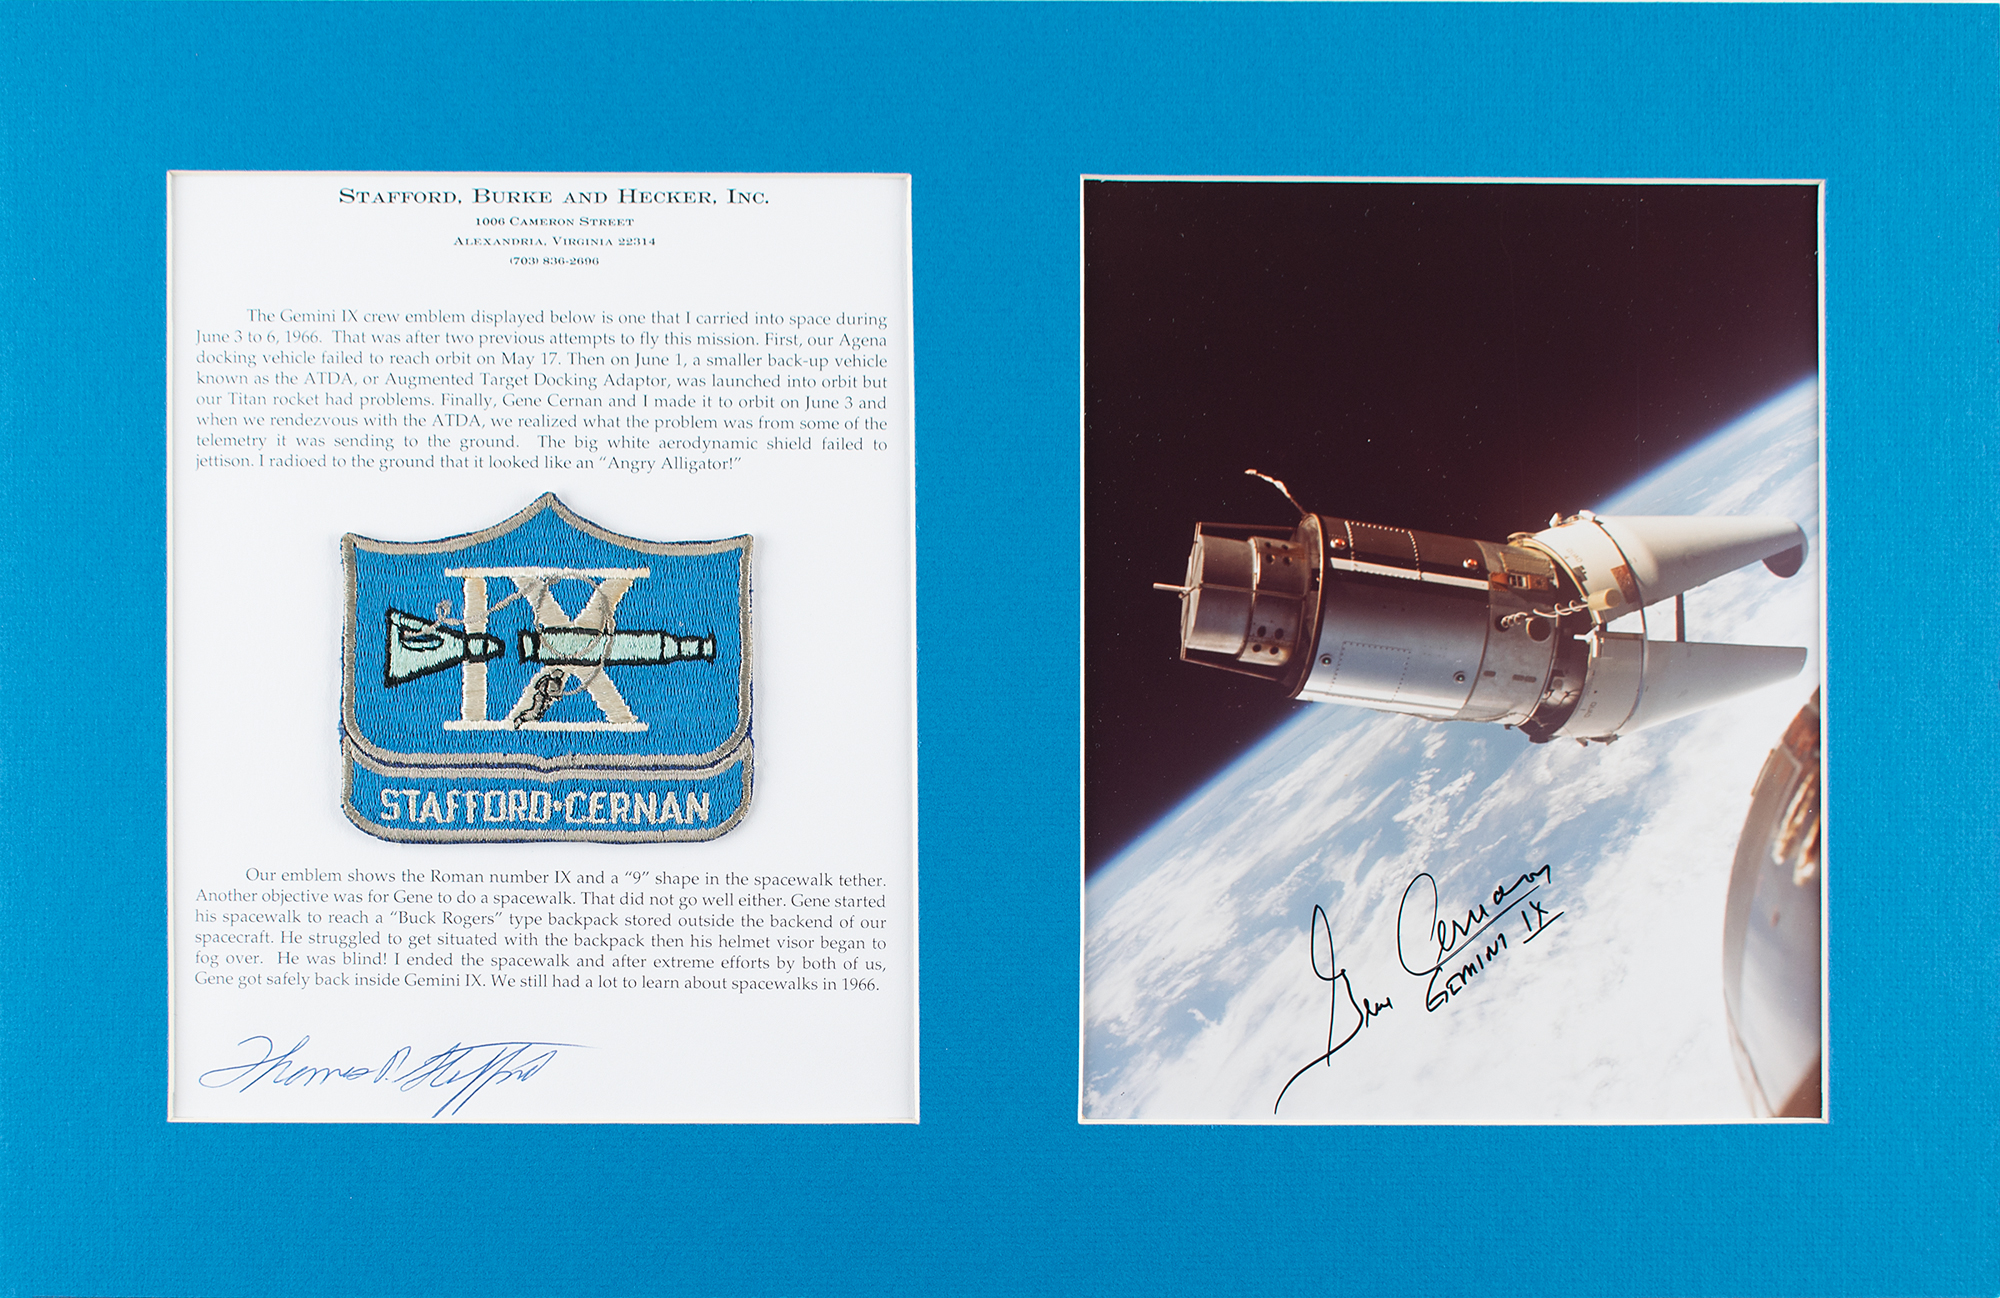 Lot #3080 Tom Stafford's Gemini 9 Flown Patch with Signed Photograph